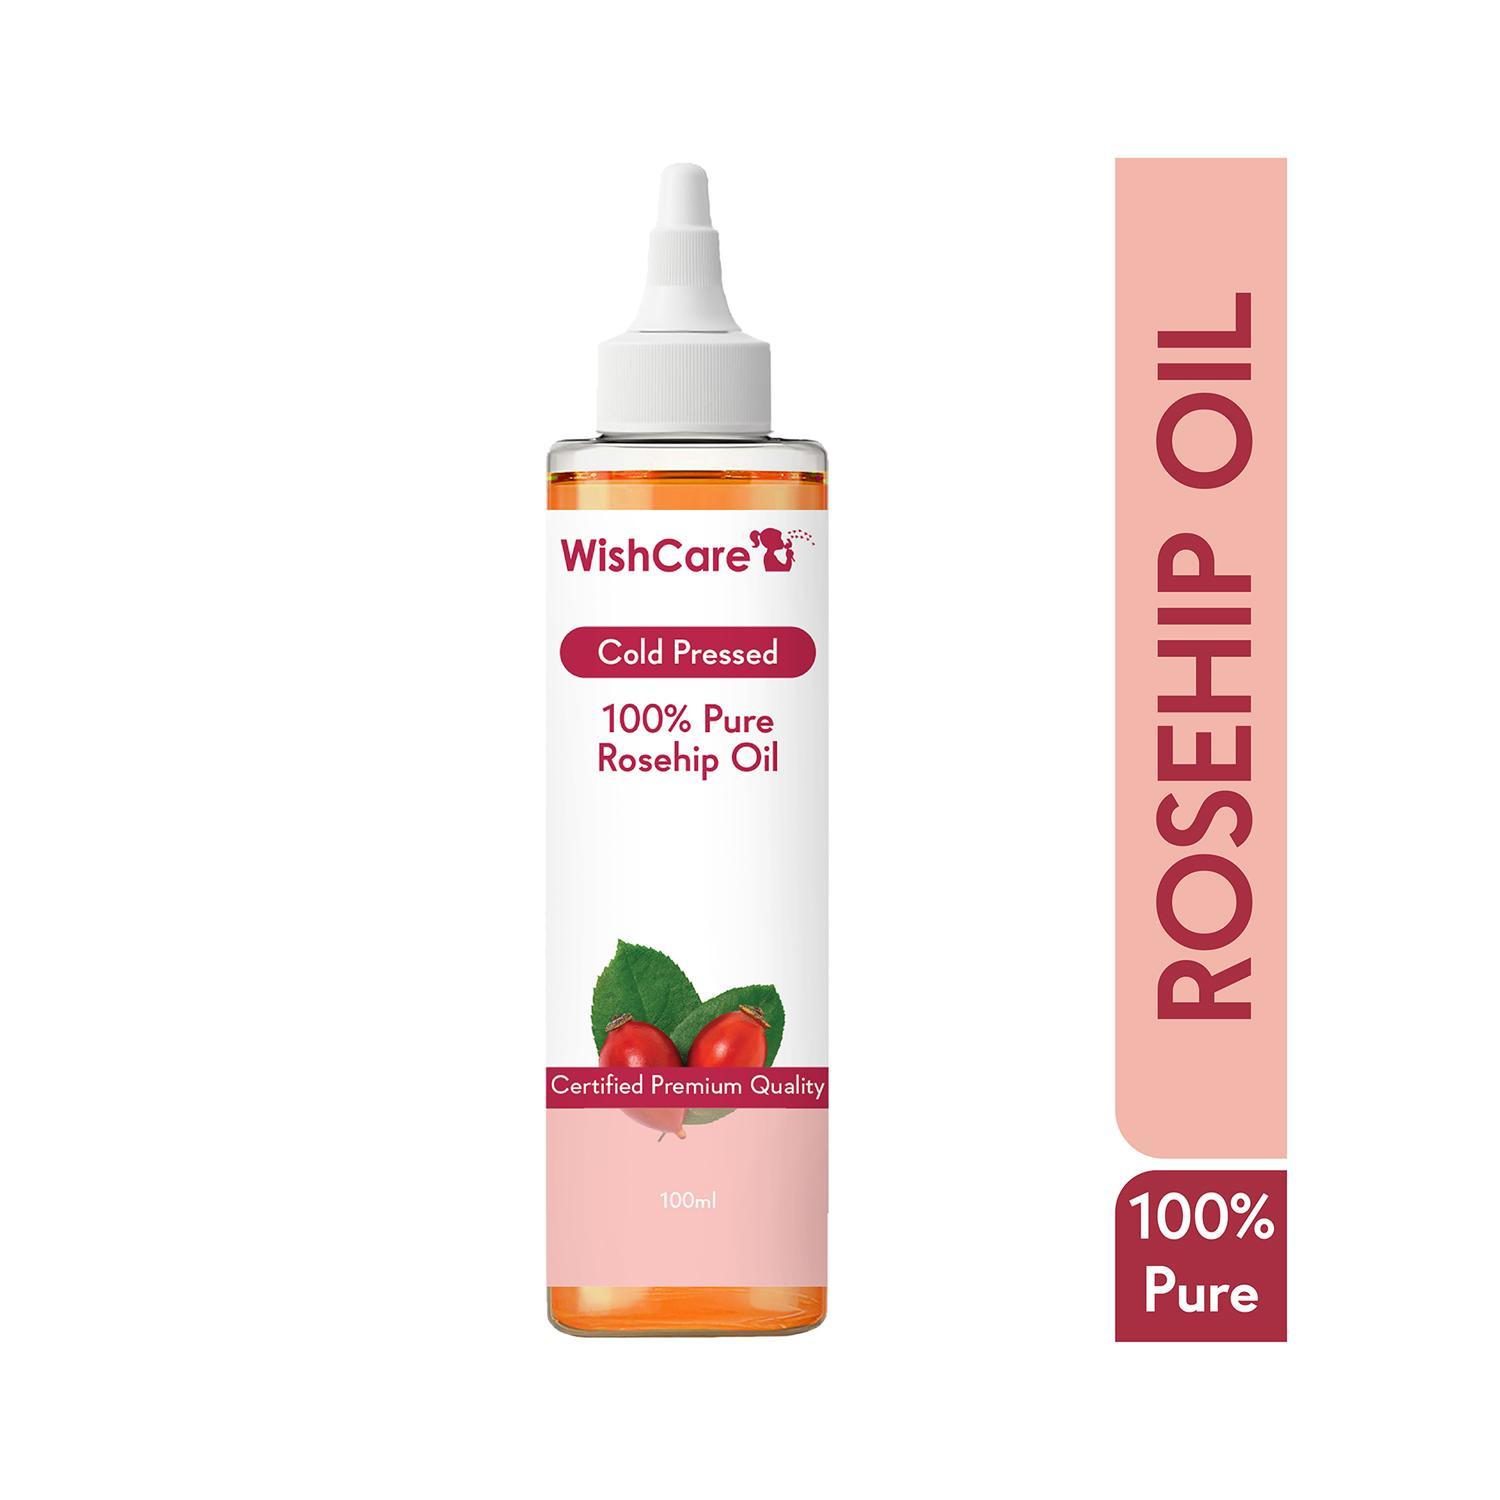 wishcare 100% pure & natural rosehip oil (100ml)